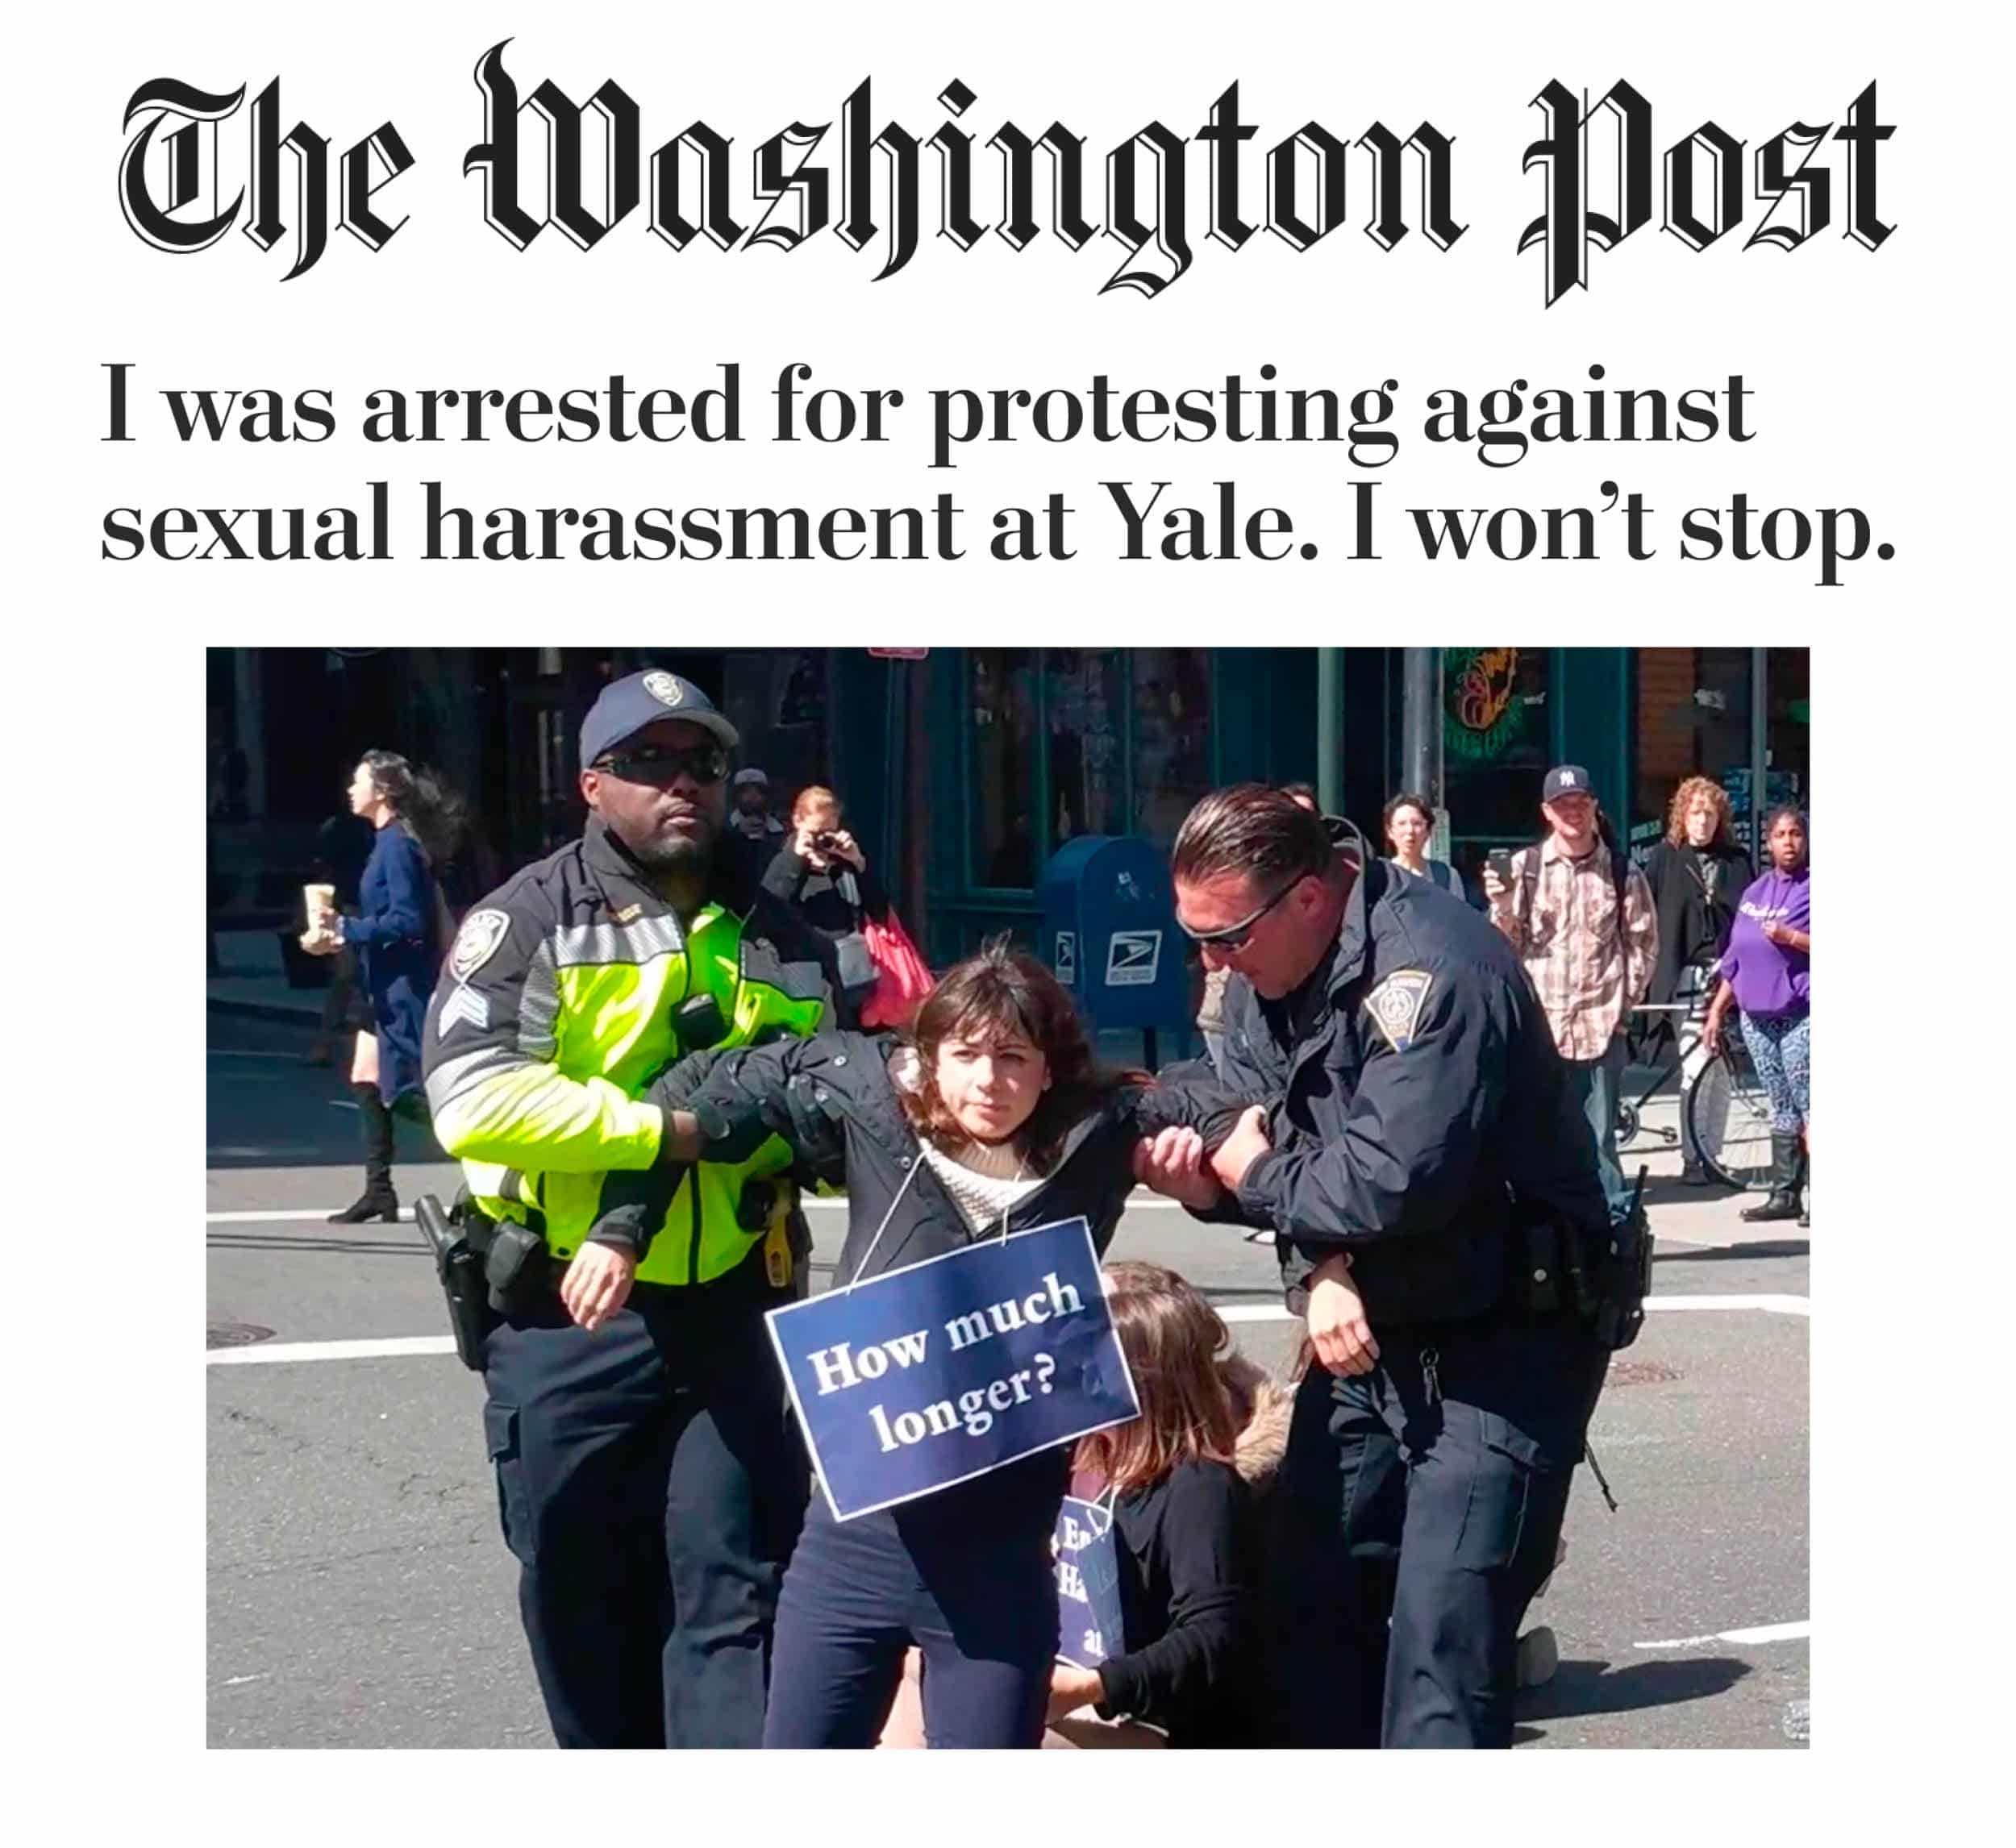 Faster who took arrest in Washington Post